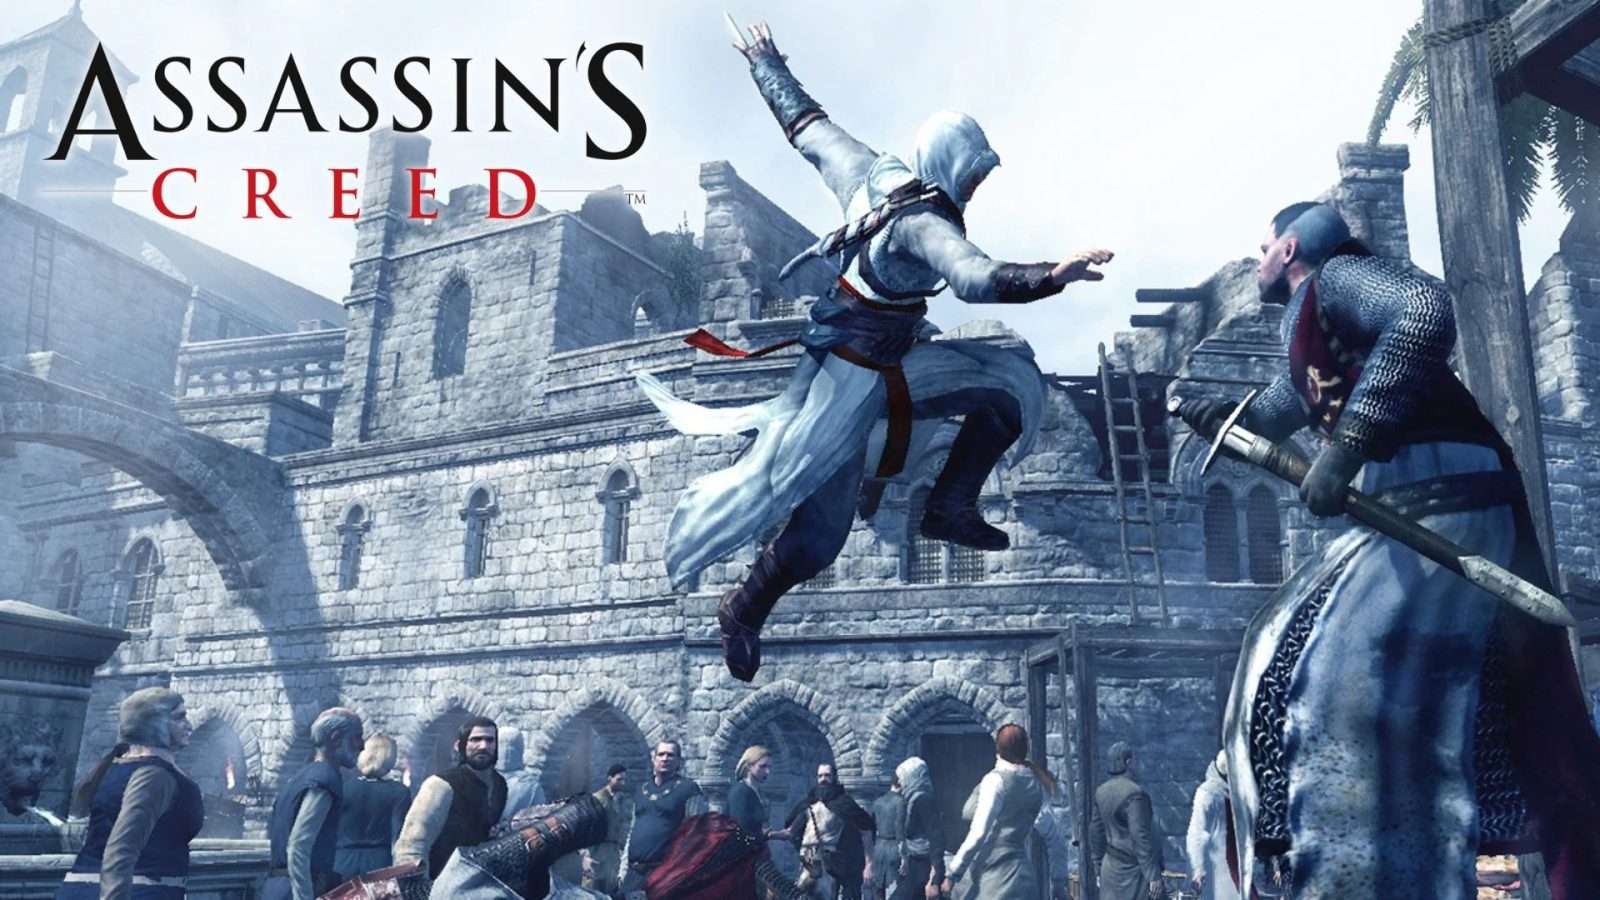 altair jumping onto enemies in assassin's creed 1